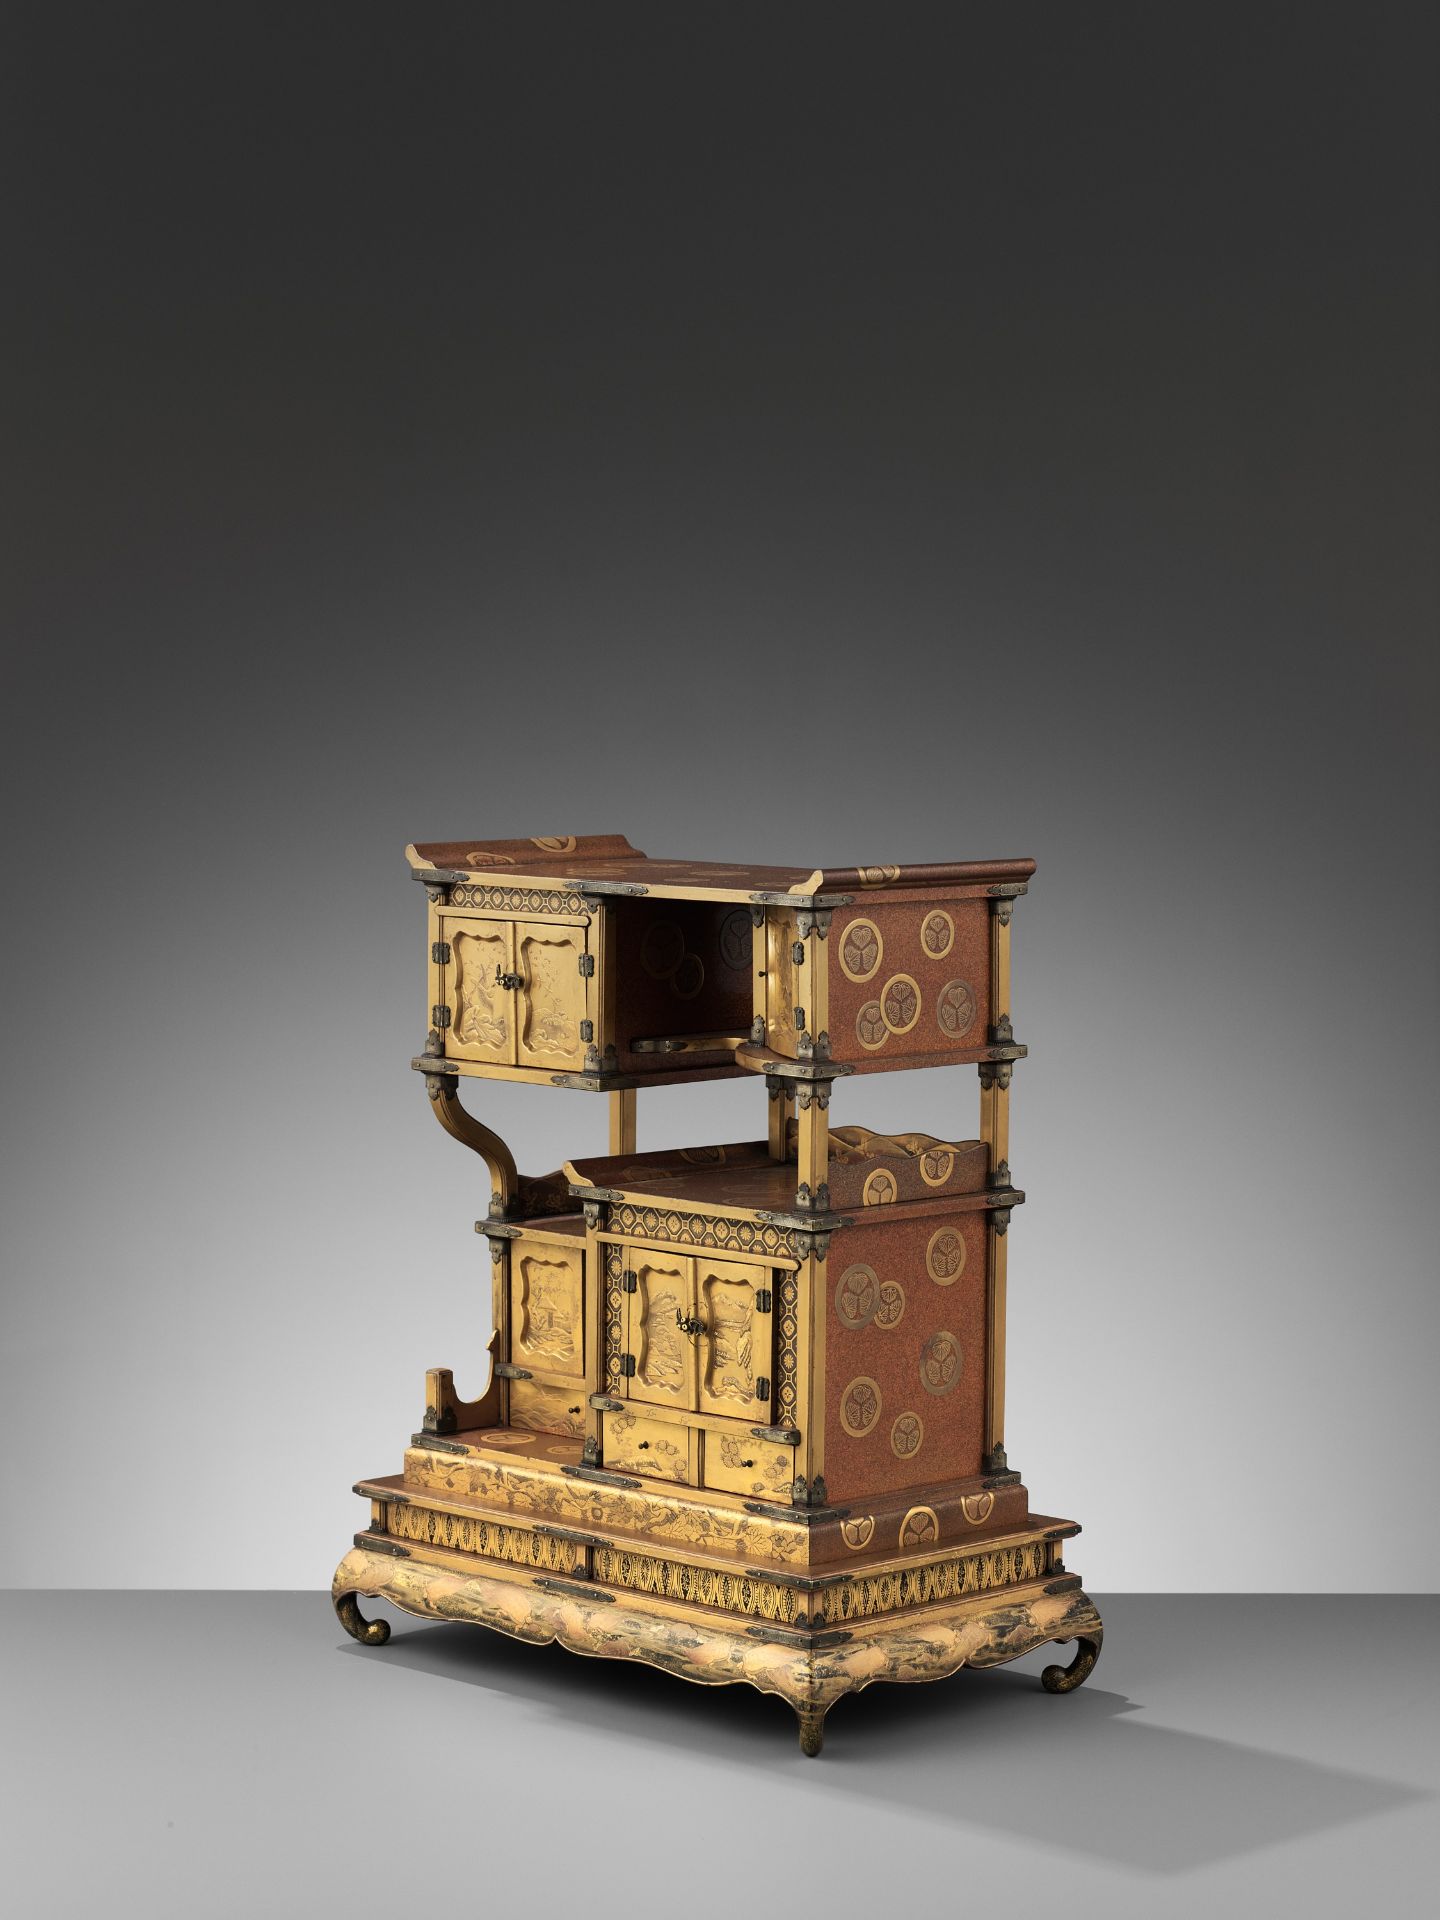 A SUPERB AND RARE SMALL GOLD-LACQUER SHODANA (DISPLAY CABINET) WITH STAND - Image 12 of 18